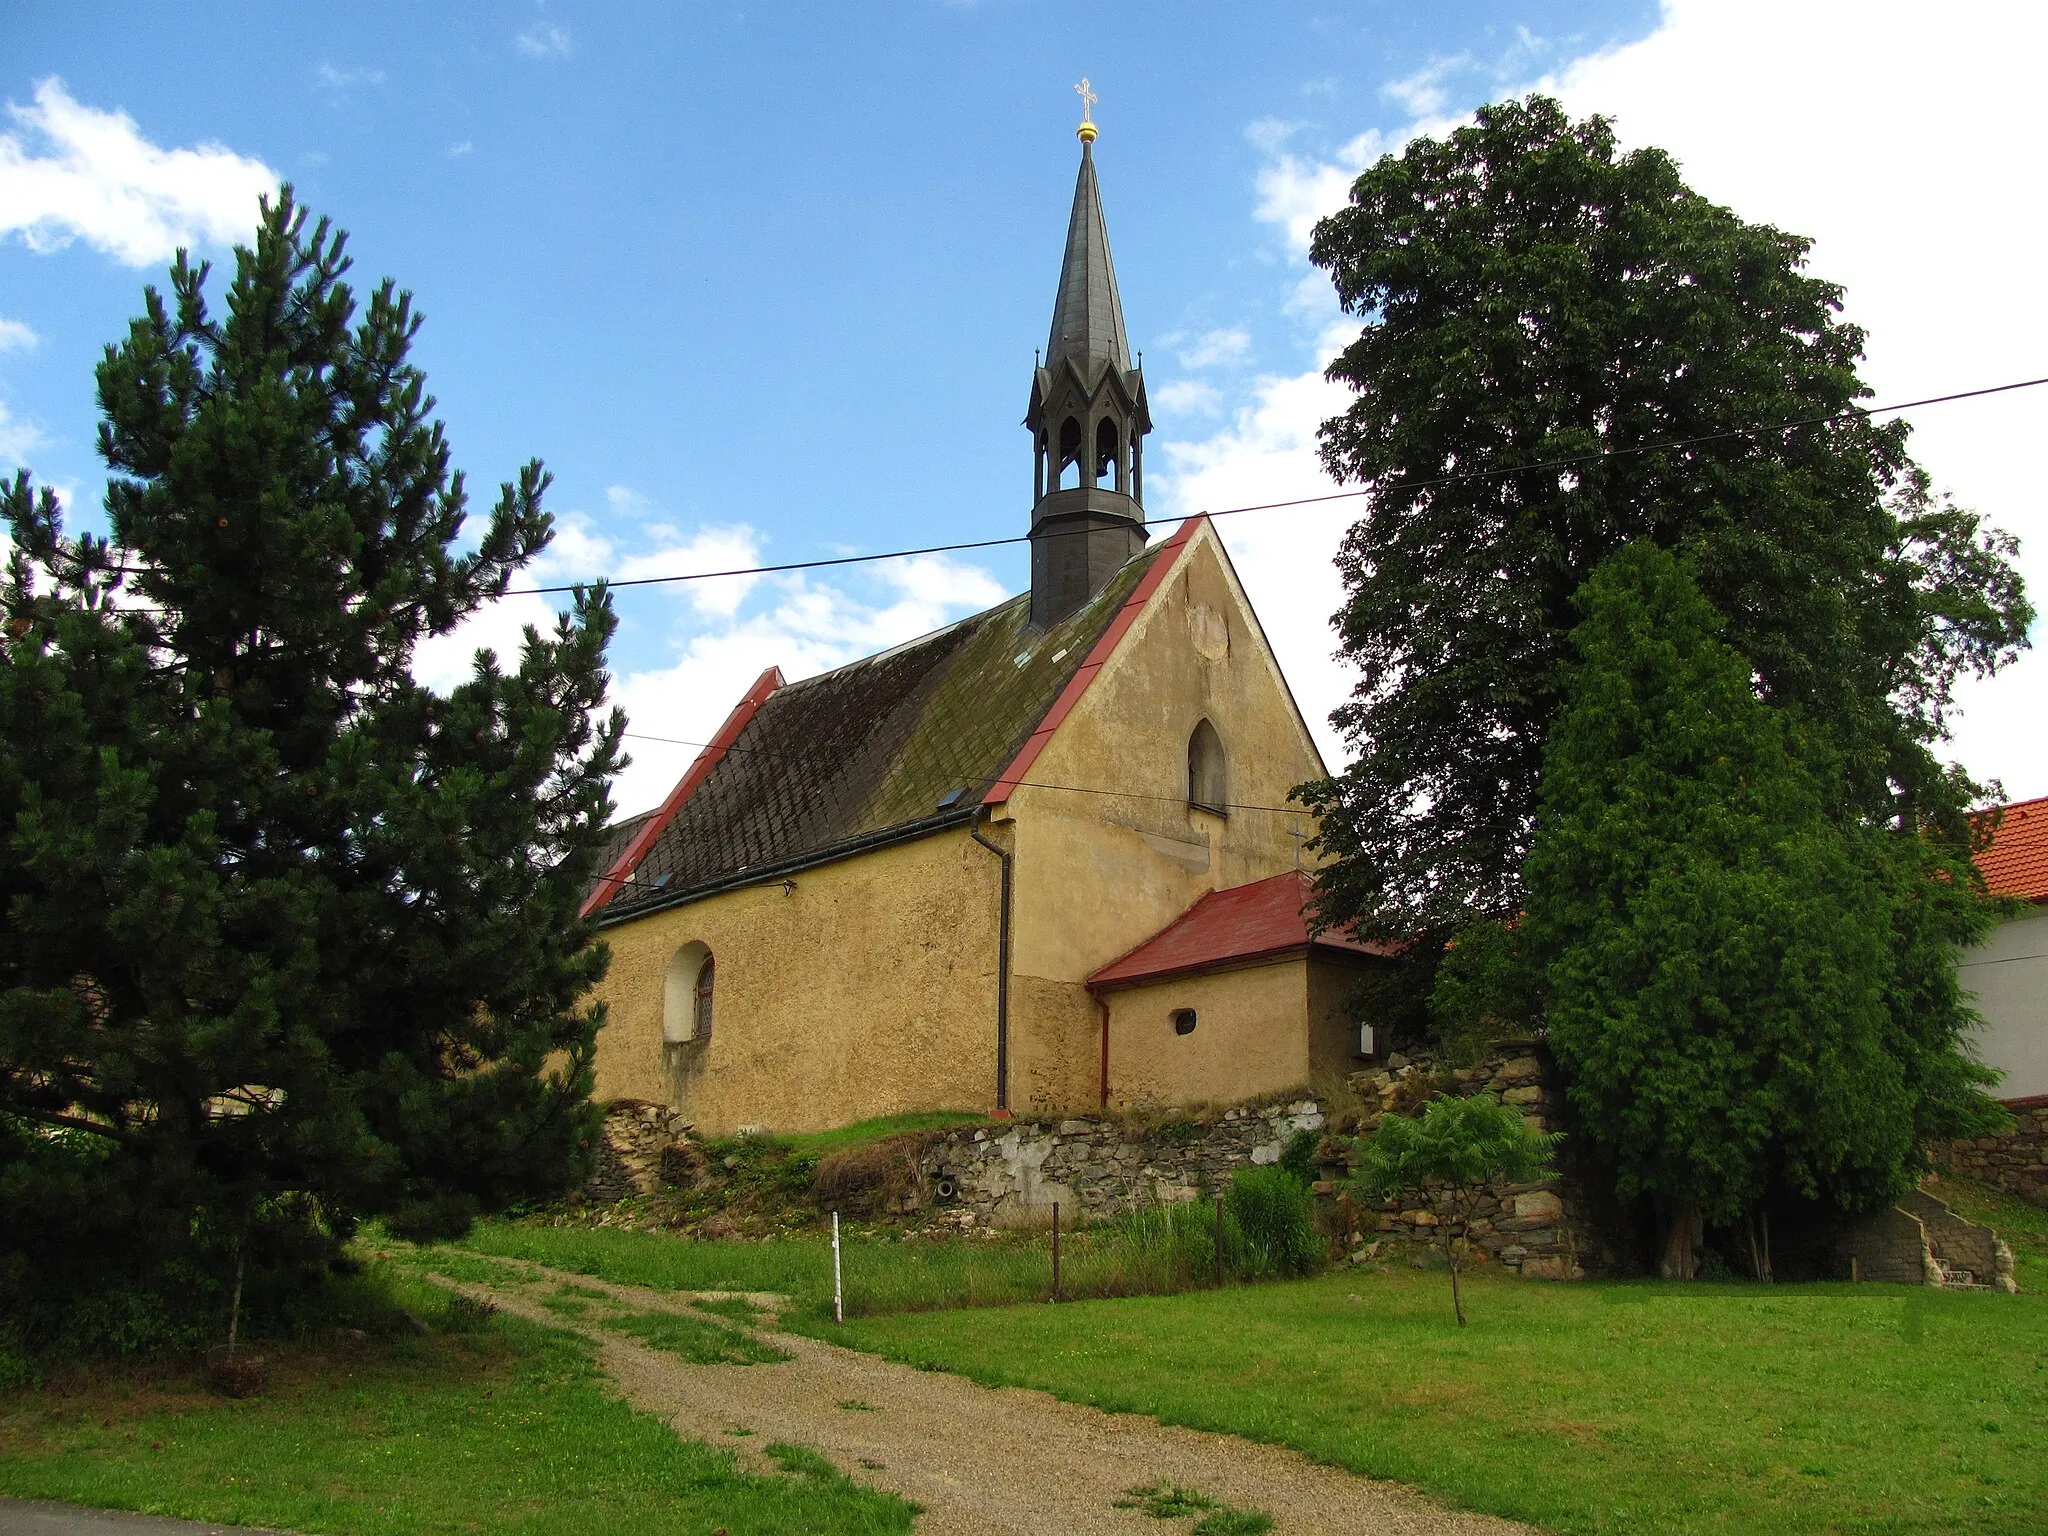 Photo showing: St. Martin's Church in Racov, District of Tachov, Czech Republic. The Church was built in 1369.